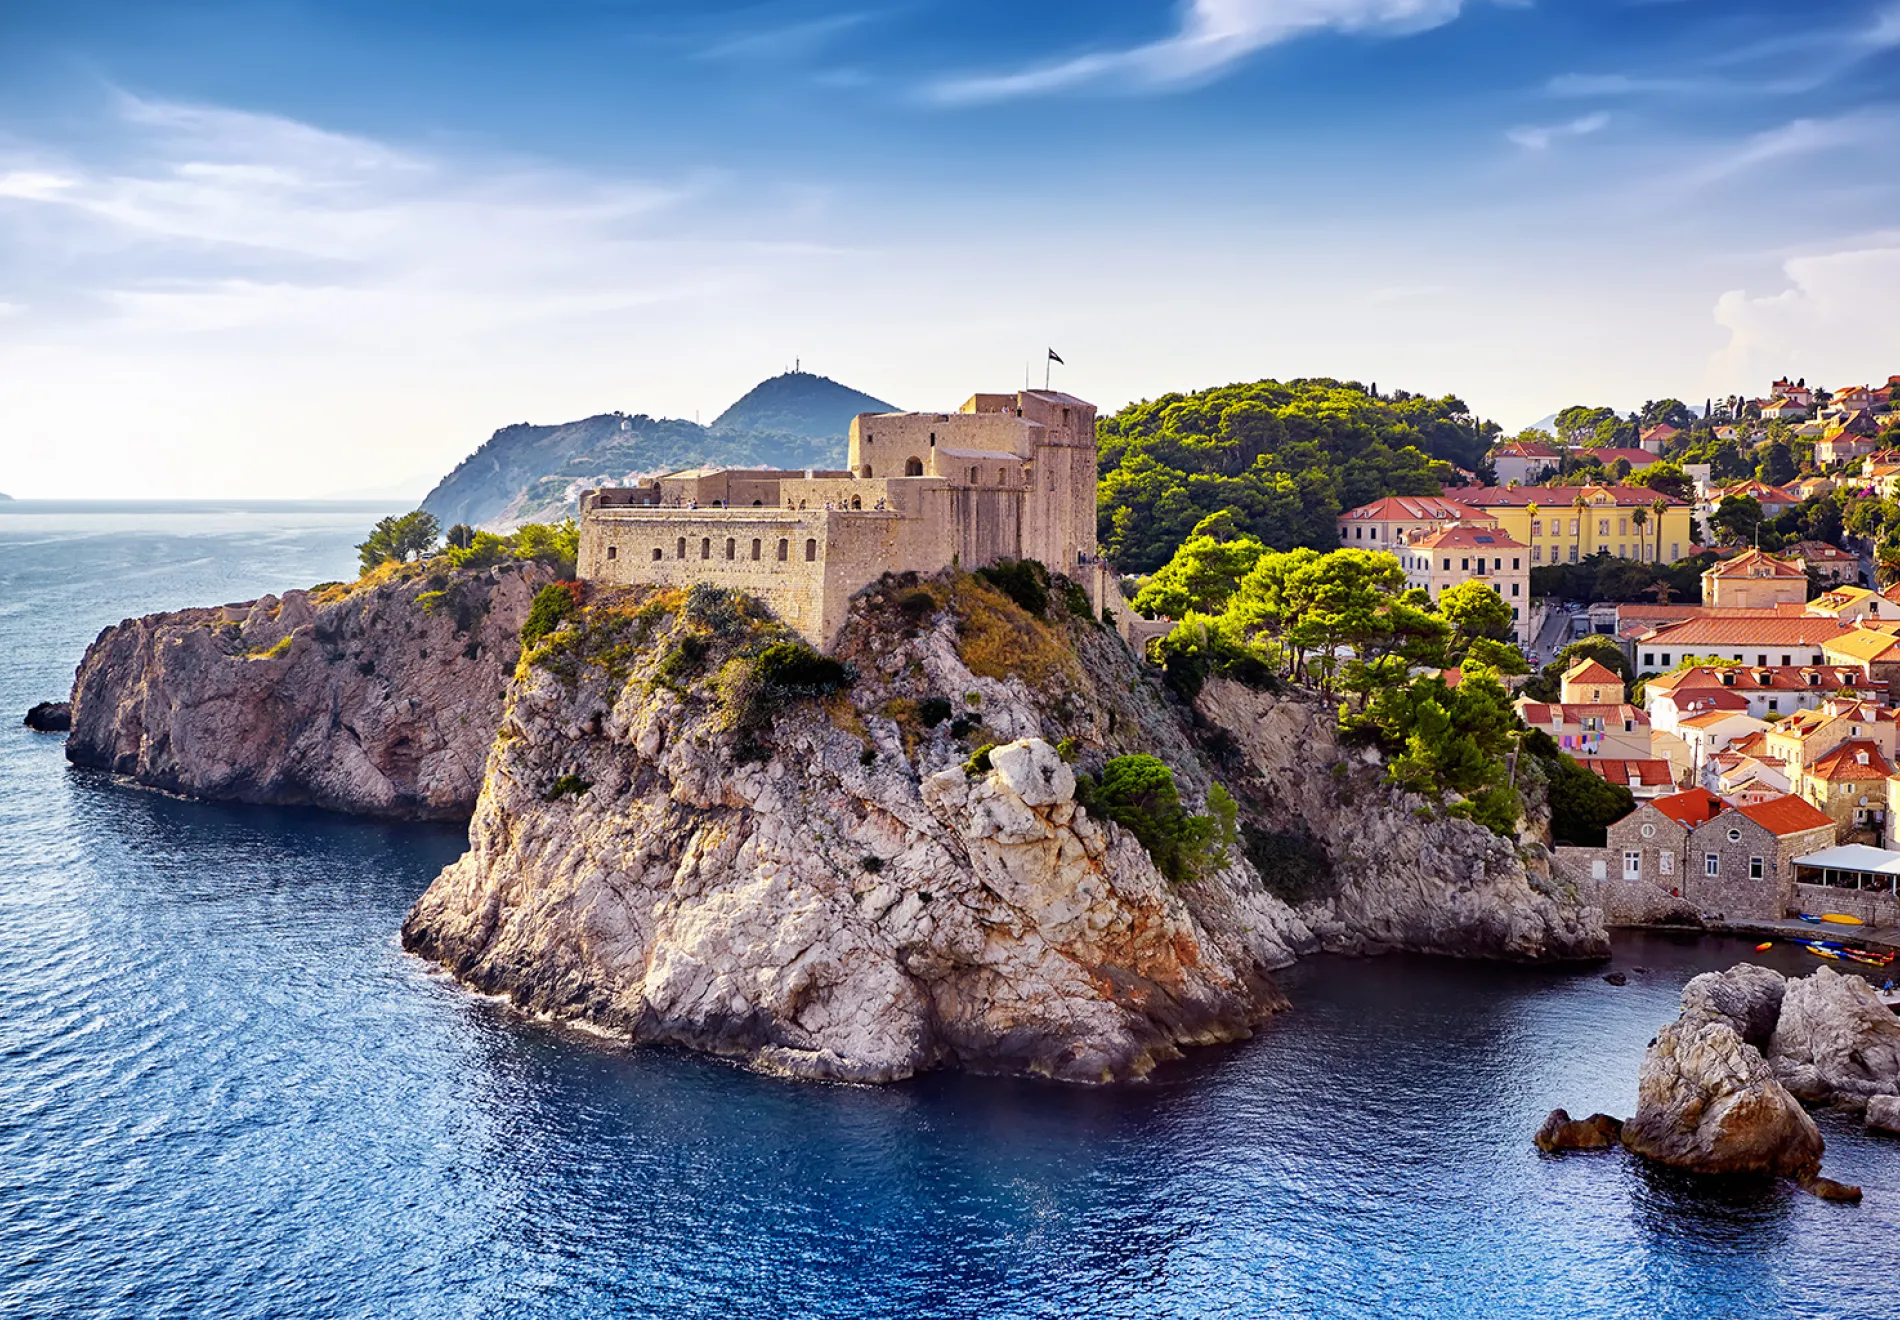 Explore Dubrovnik on board a yacht